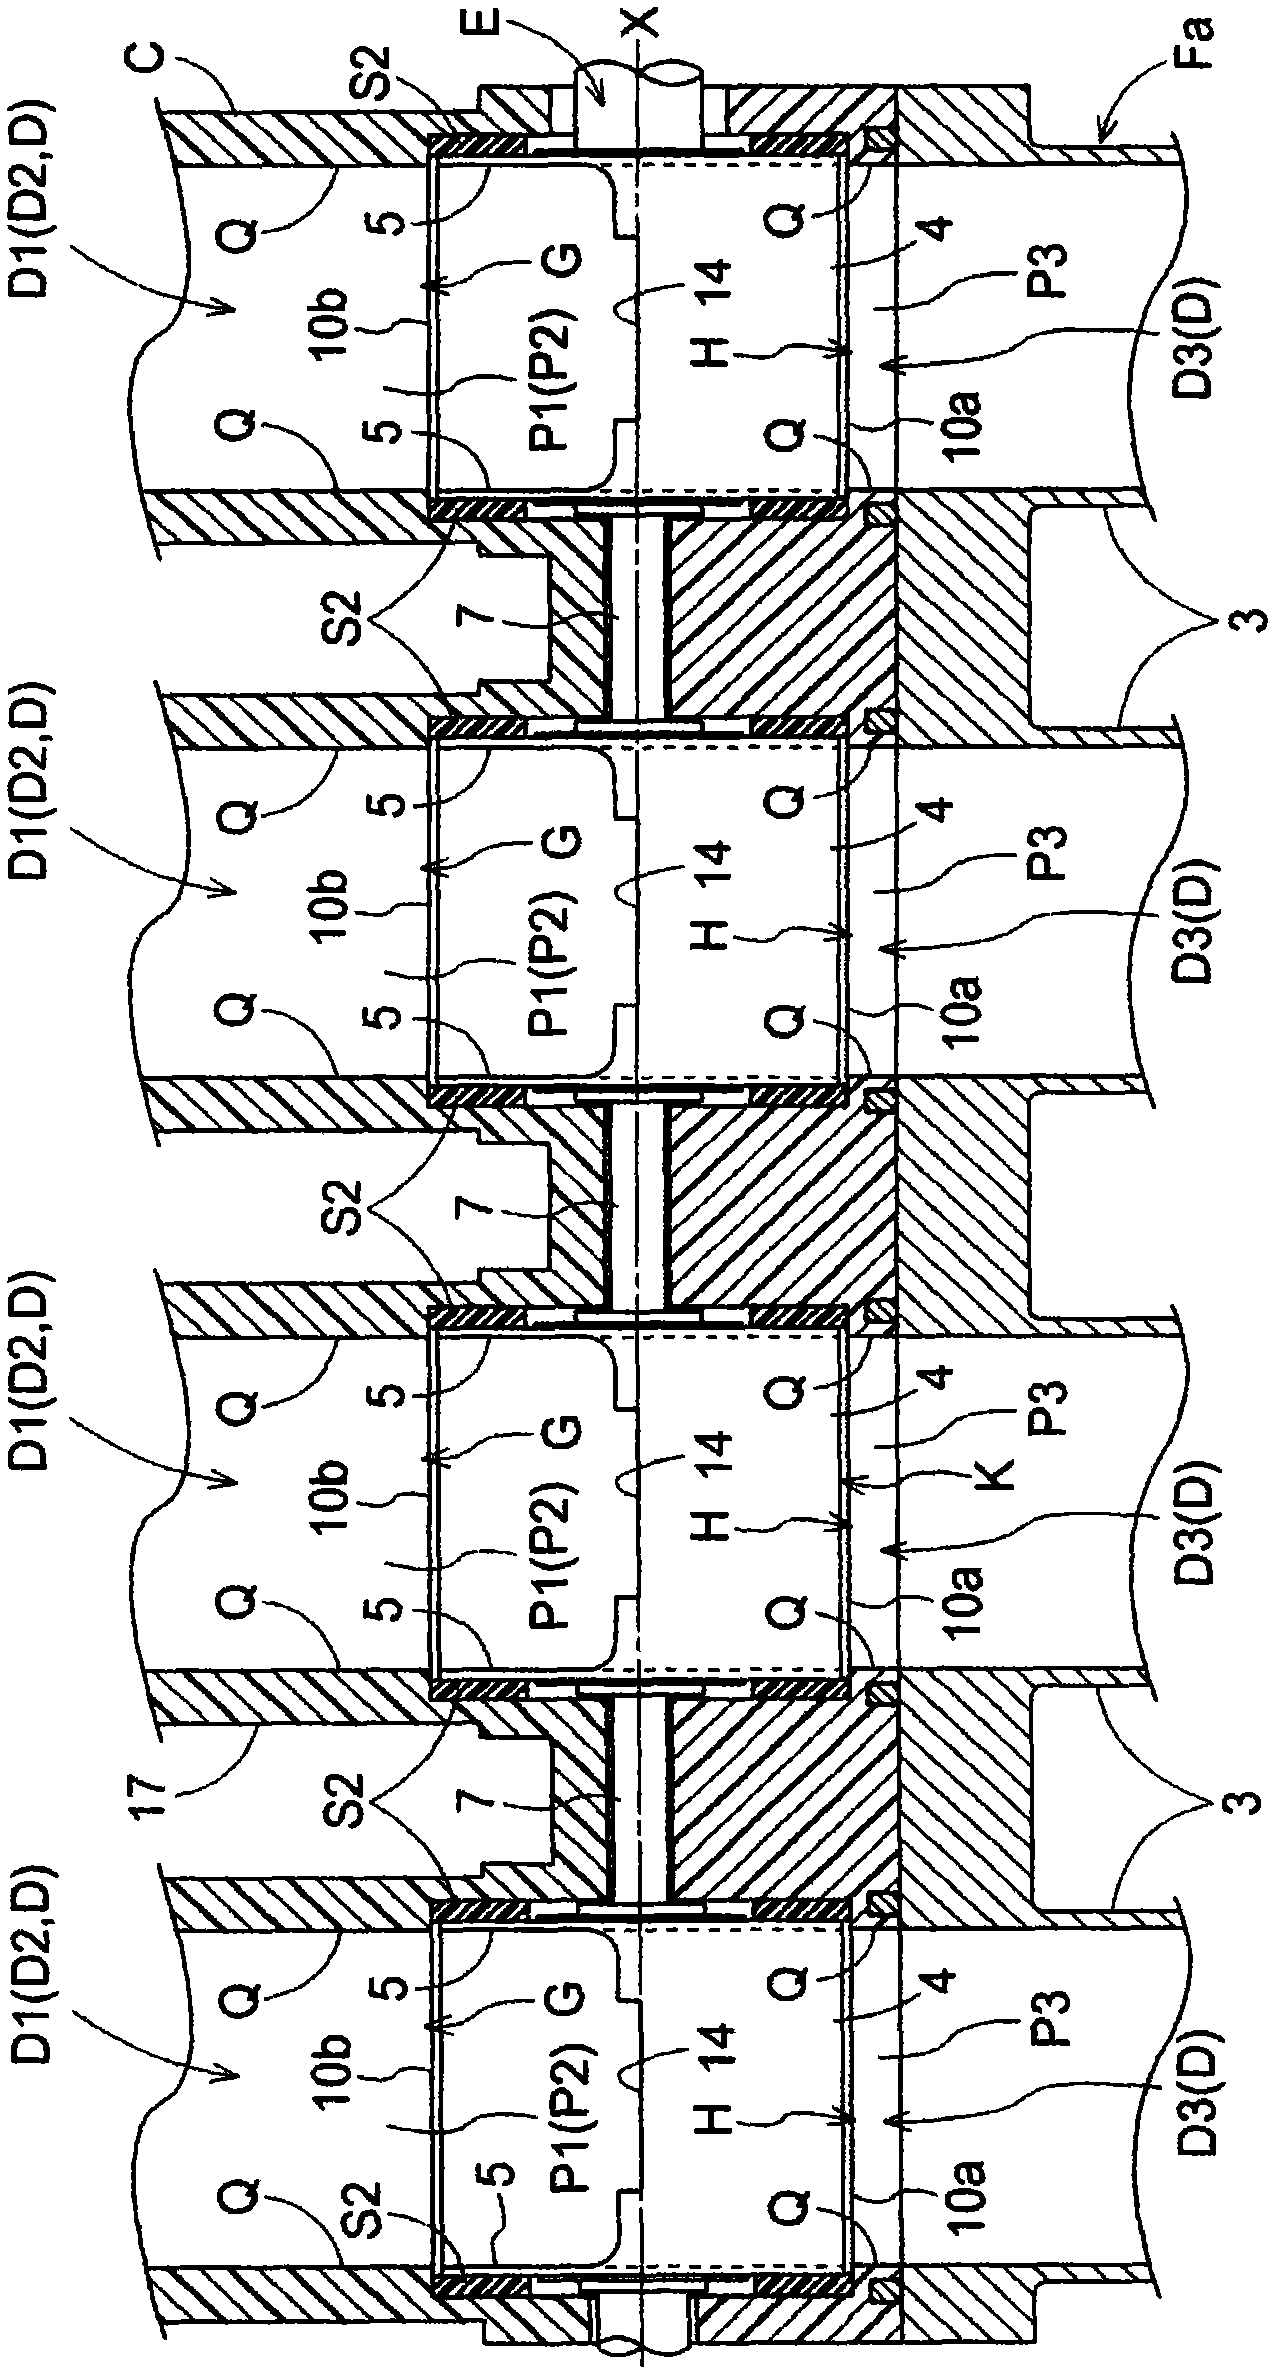 Air intake apparatus for internal combustion engine